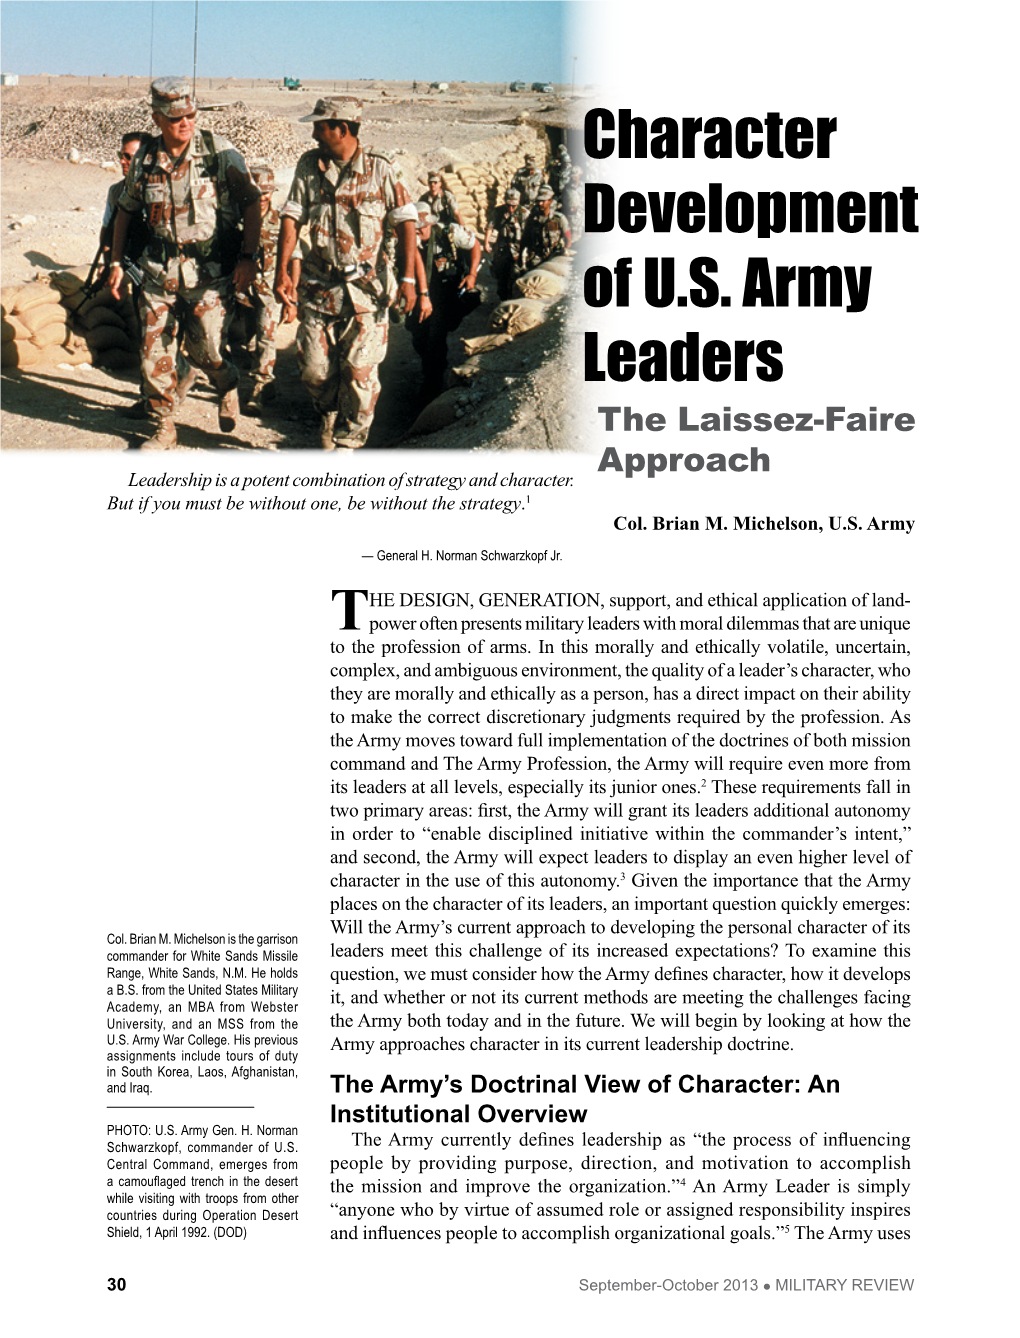 Character Development of U.S. Army Leaders: the Laissez-Faire Approach